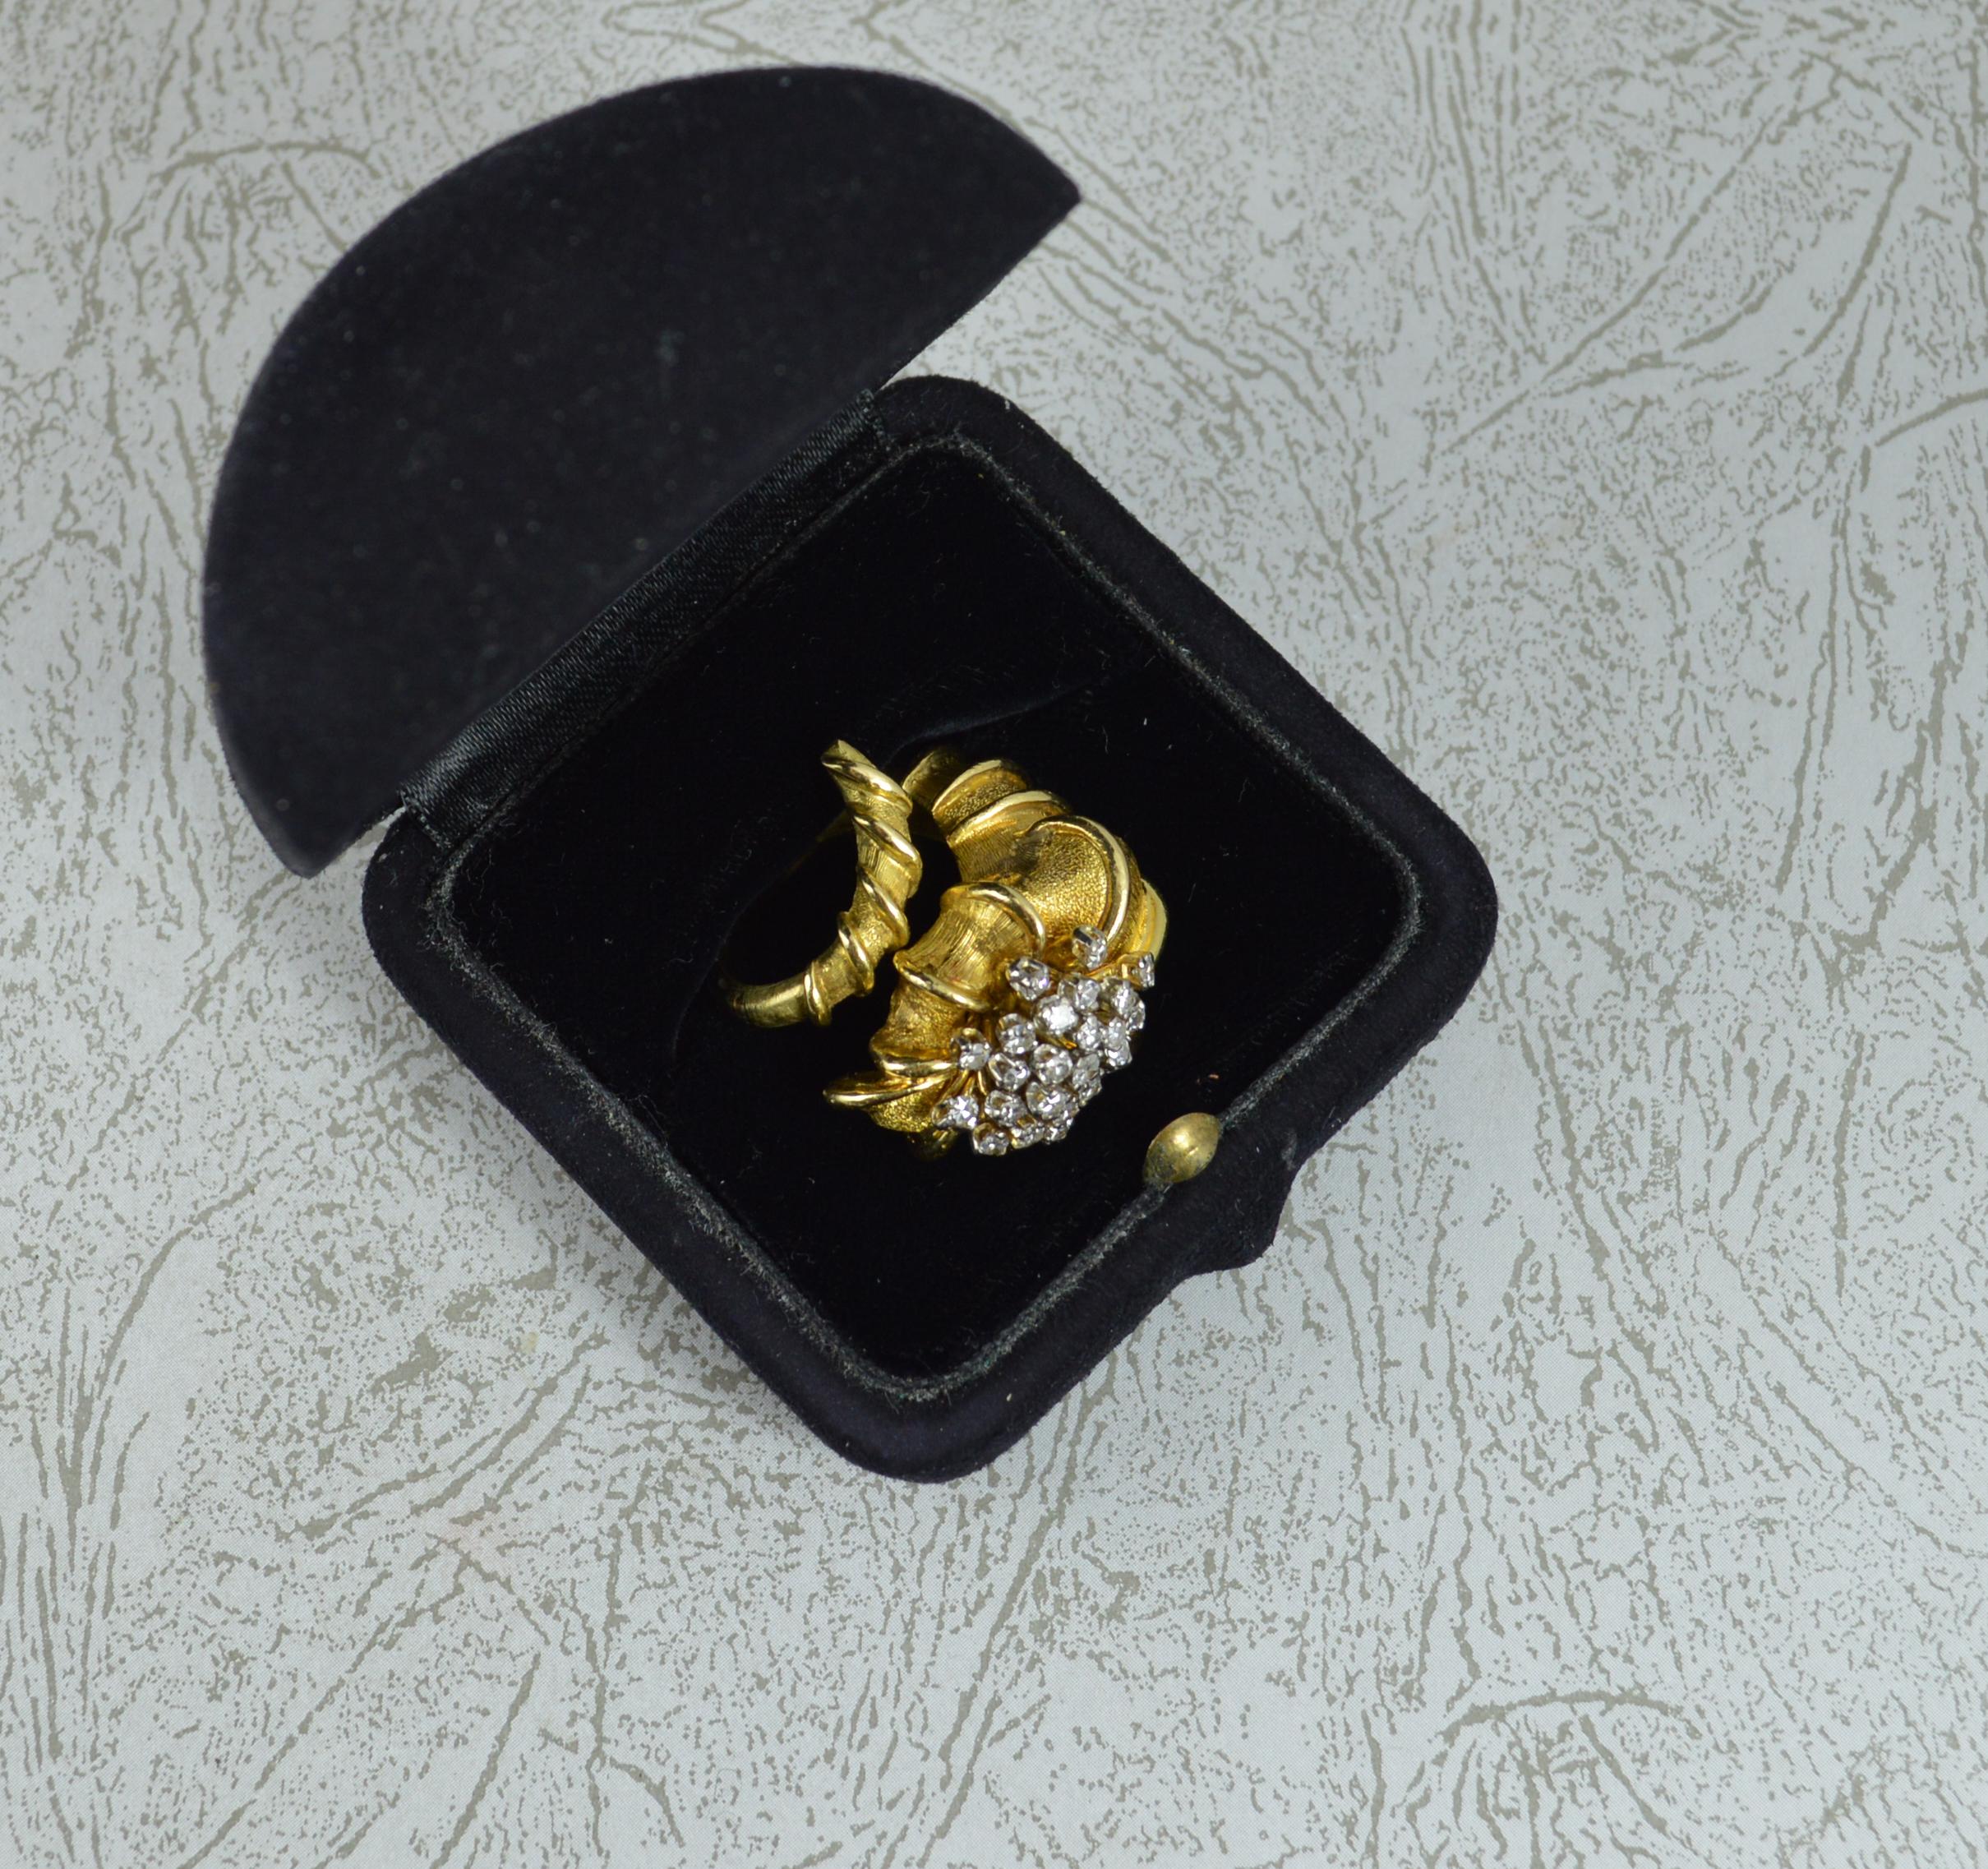 An impressive 18ct gold and diamond cluster ring by Ilias Lalaounis.
Solid 18 carat yellow gold example. Very heavy, weight piece.
Set with many round cut diamonds to front.
A striking natural shell type design. 25mm wide, protruding 16mm off the